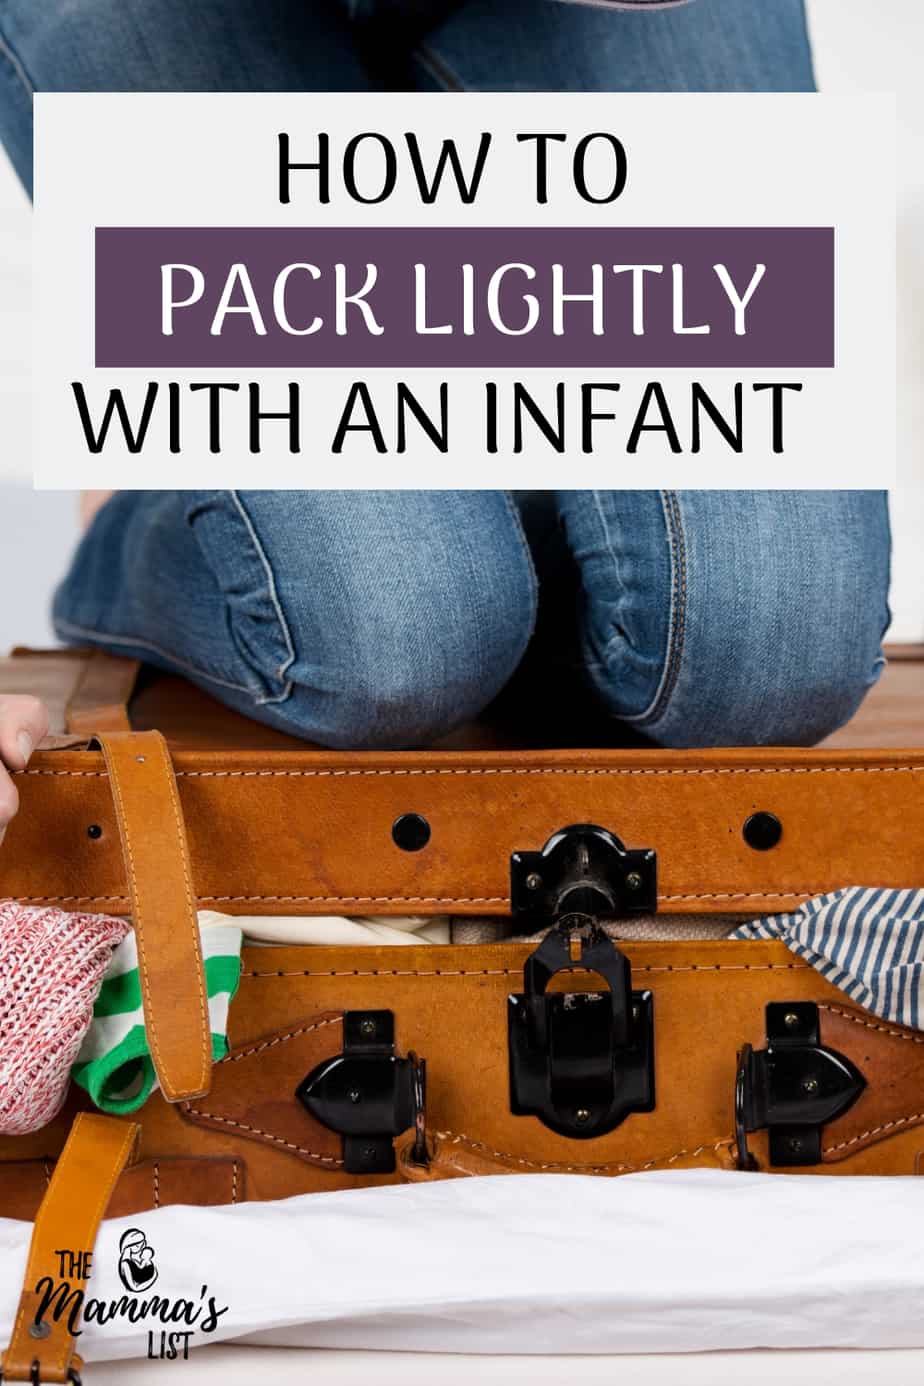 Packing light with a baby may seem like an impossible task since they need so much stuff, but it's actually easier than you think. There are a few ways to pack lightly with a baby (or toddler) for vacation as long as you plan ahead, and start with a good packing list. 